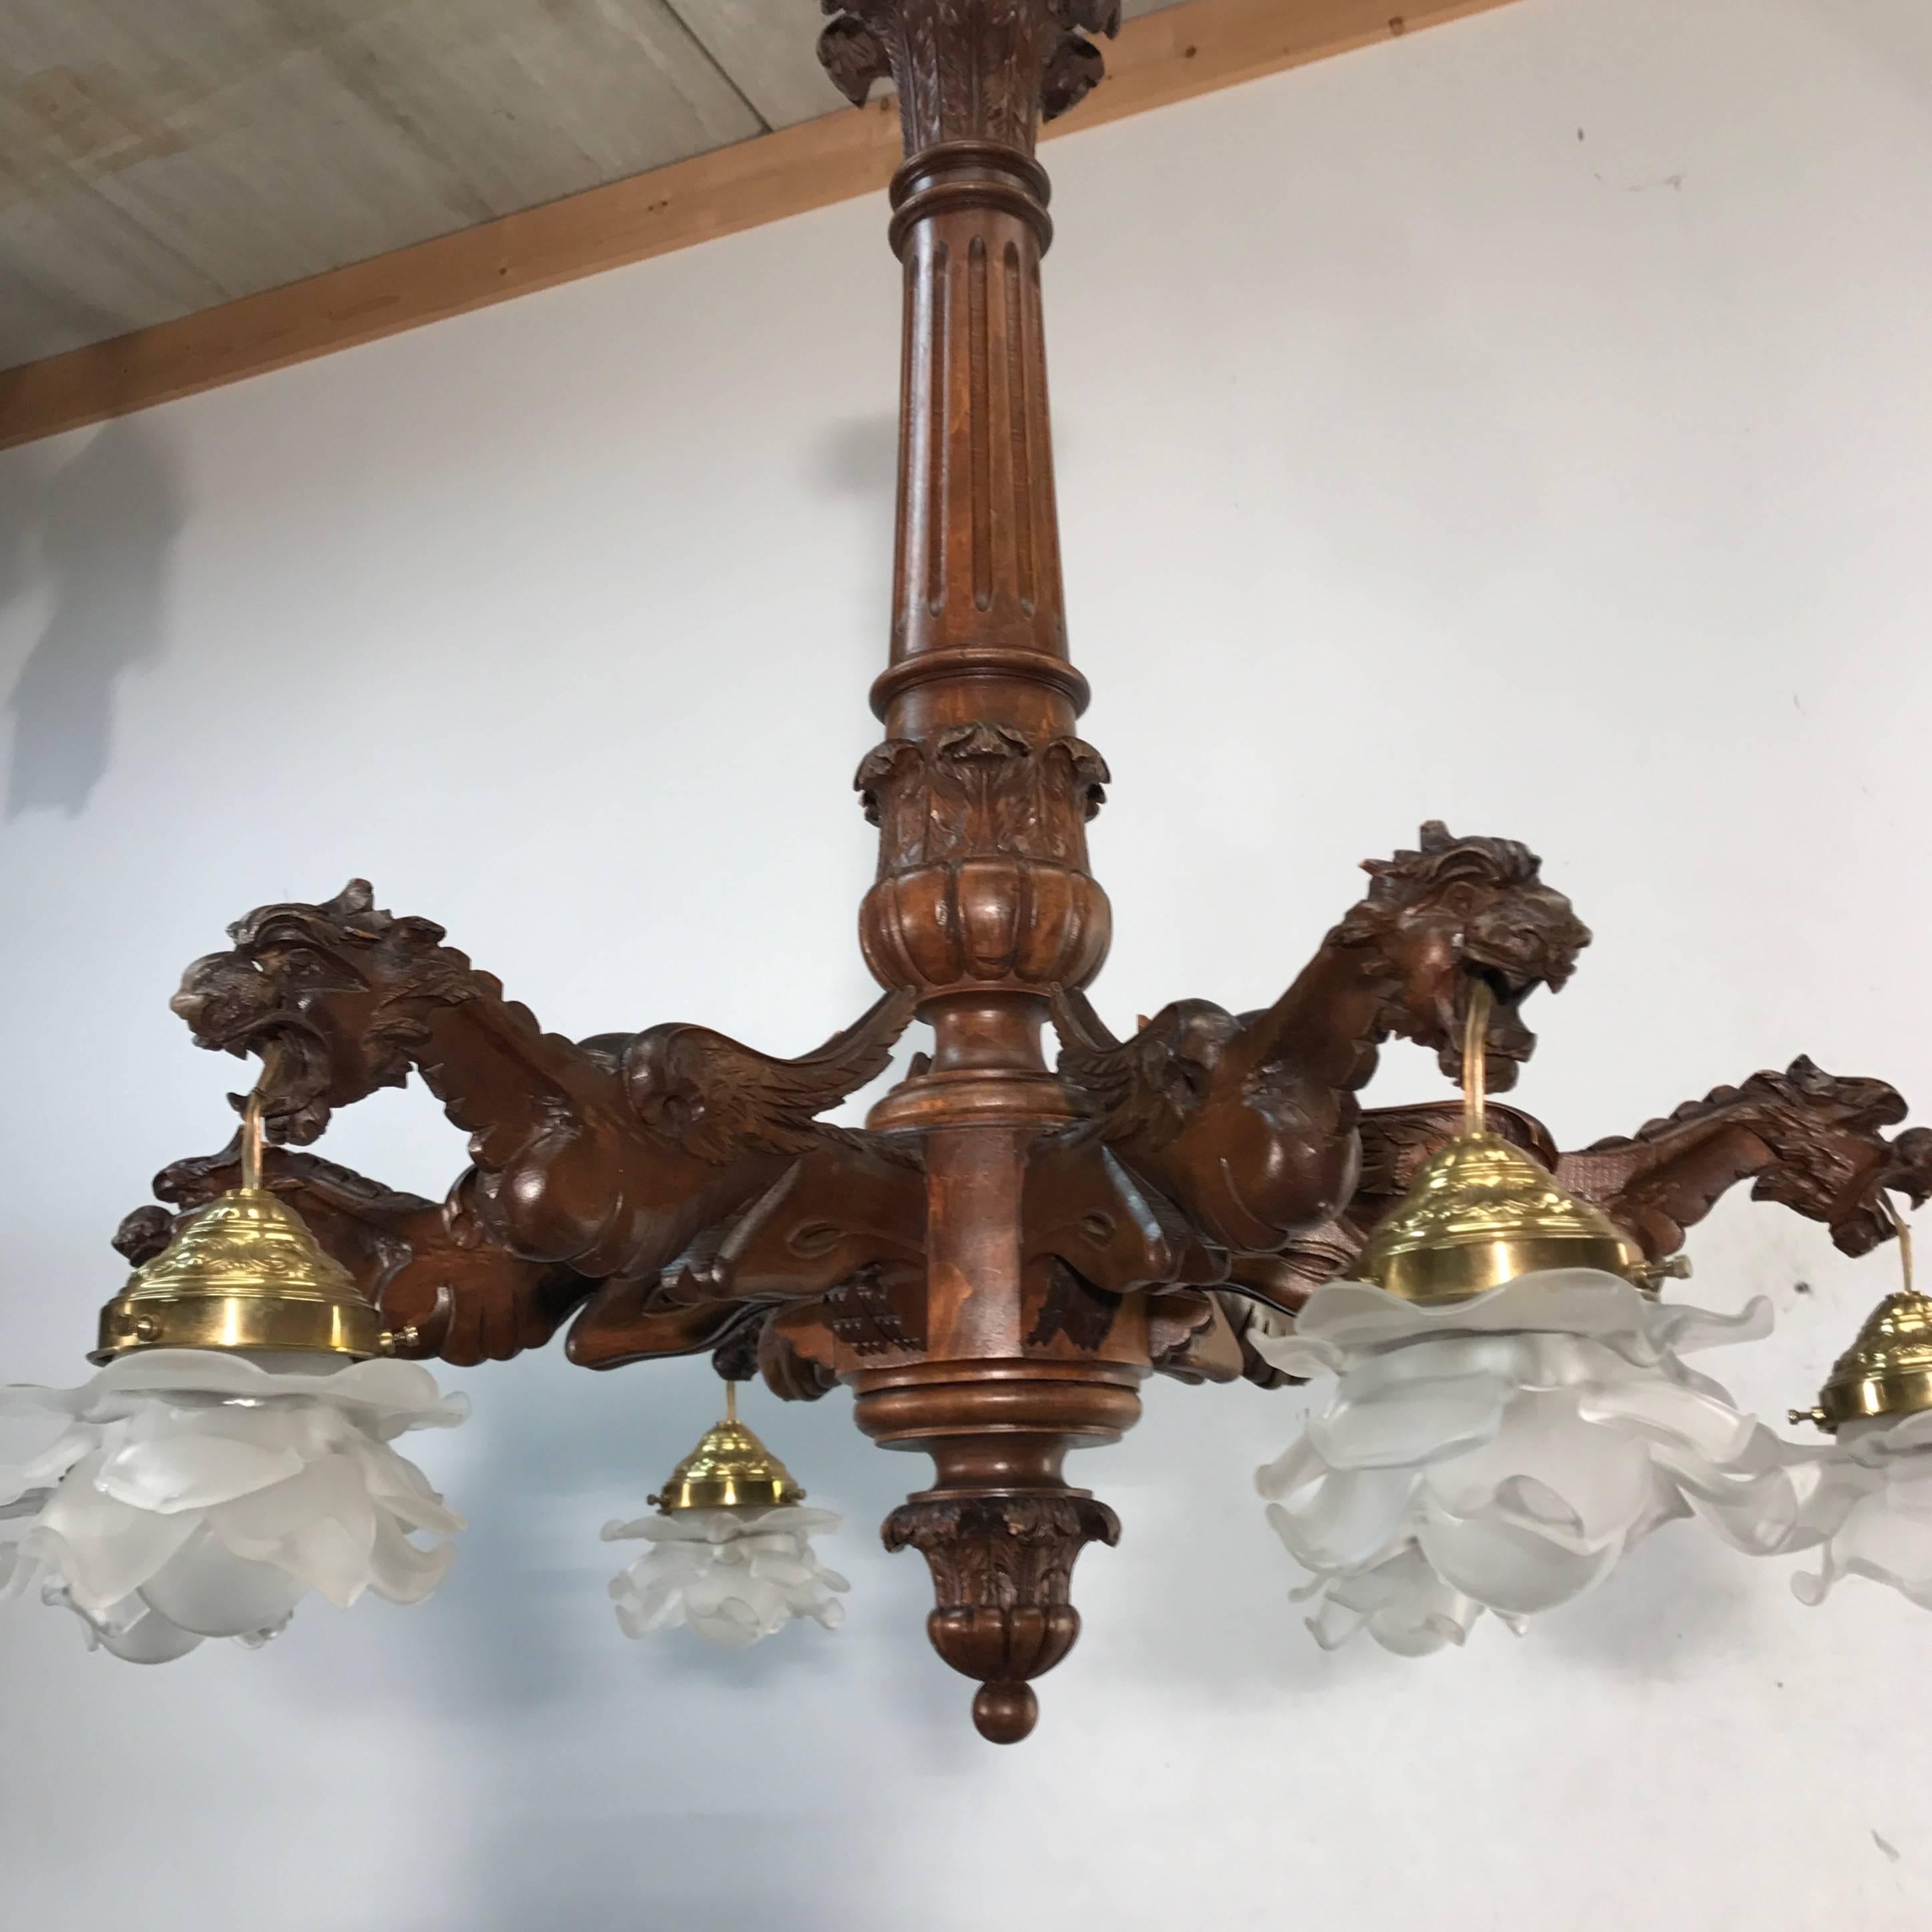  Stunning  Wooden Chandelier in Gothic or Medieval Style with Dragon Sculptures 2